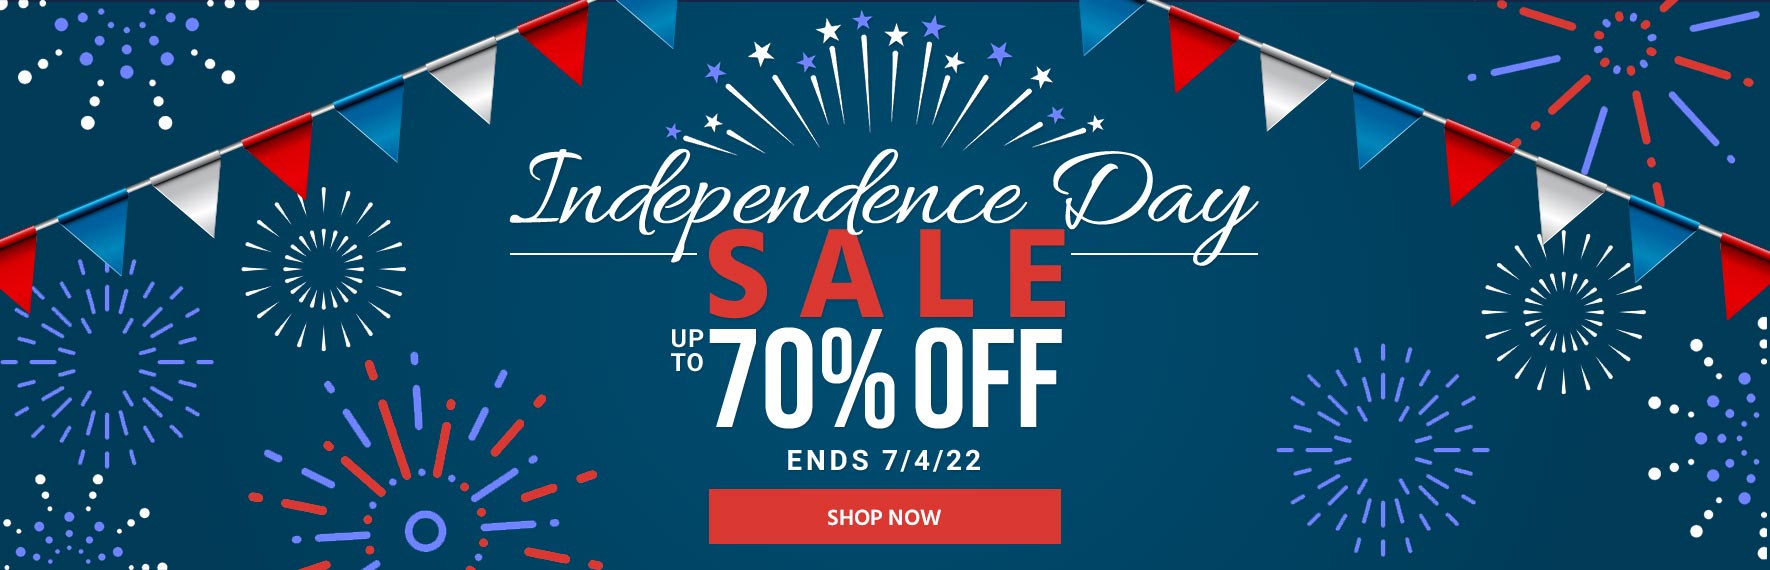 Independence Day Sale Up to 80% off Ends 7/4/22 Shop Now